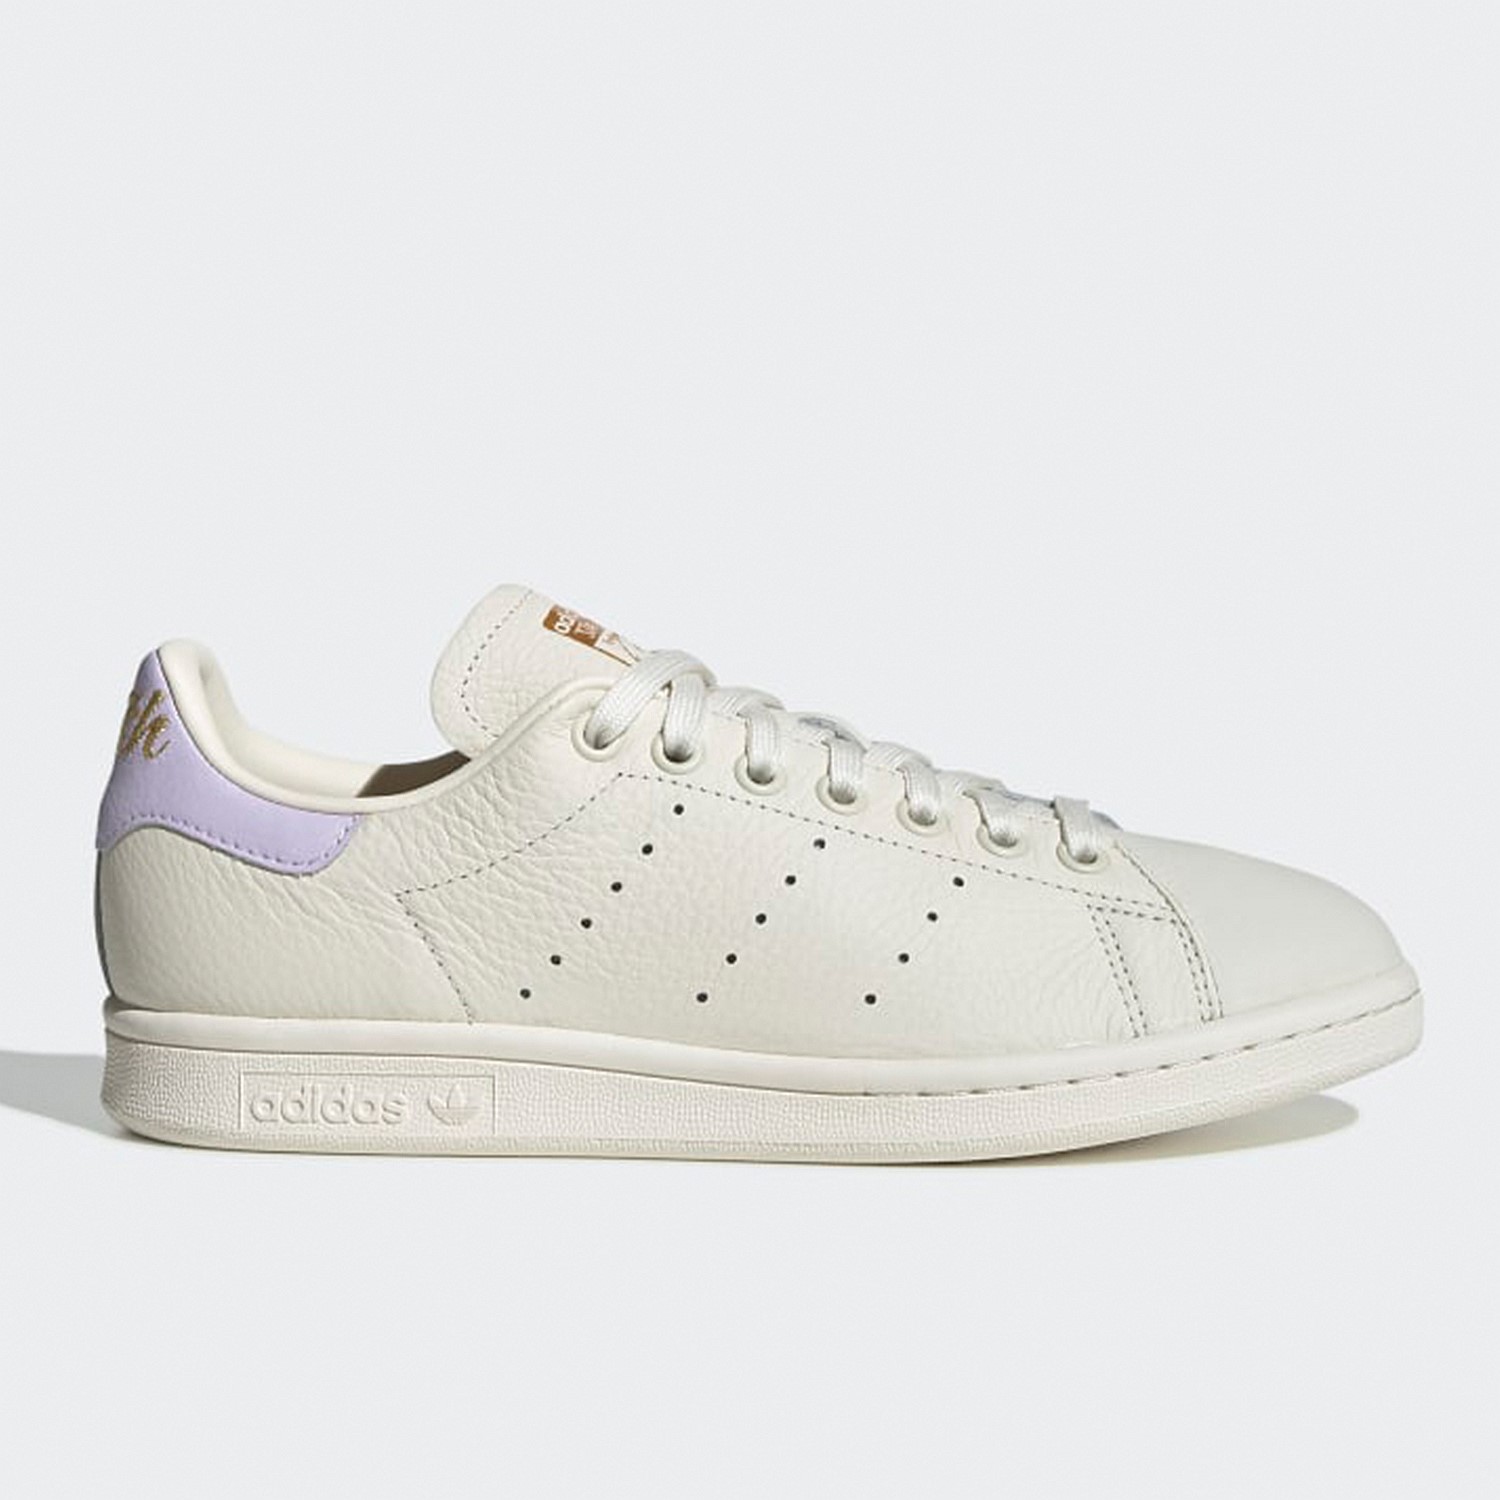 Stirling Sports - Stan Smith Womens